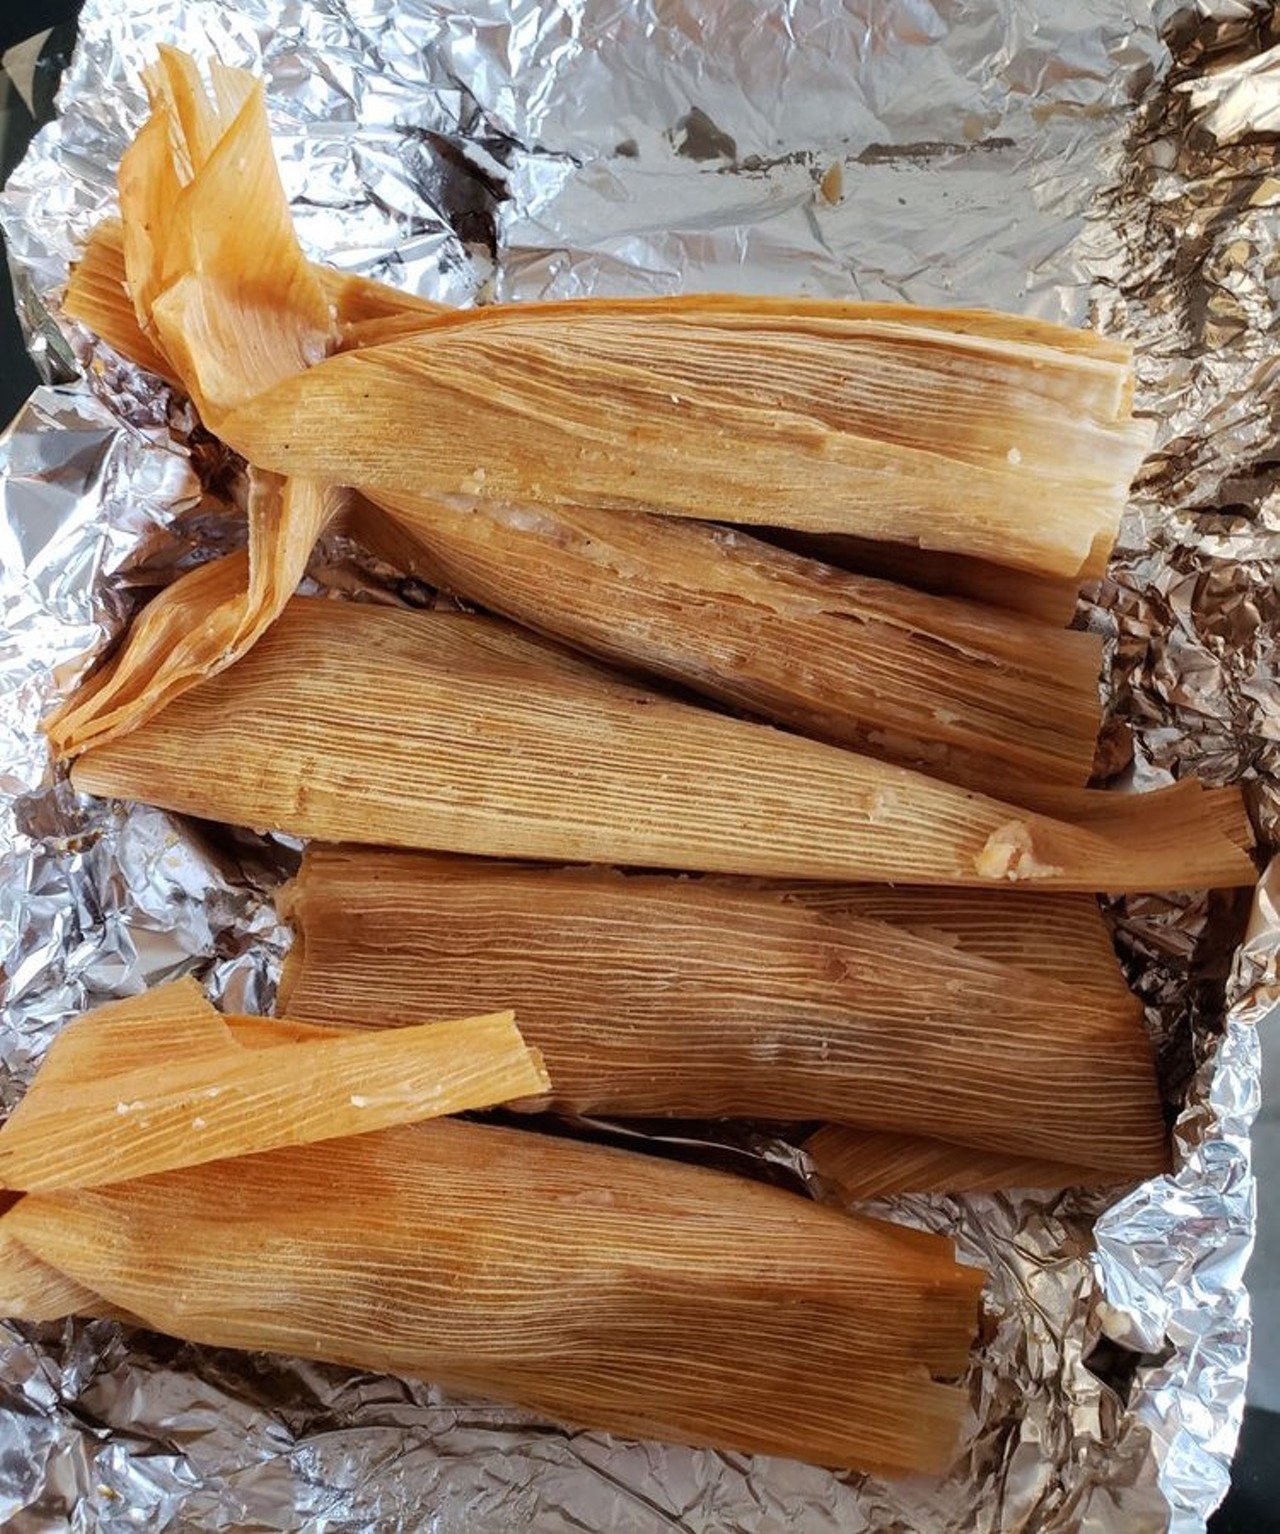 Ruben’s Homemade Tamales
1807 Rigsby Ave, (210) 337-0025, facebook.com
Homemade tamales make all the difference when you’re hungry in December (or really any time of year). Over on Rigsby you’ll find some of SA’s favorite tamales at Ruben’s, where the lines may be long this time of year, but that’s only because it’s just that tasty. Choose from specialties like bean, chicken and pork with jalapeño.
Photo via Yelp / Dale H.